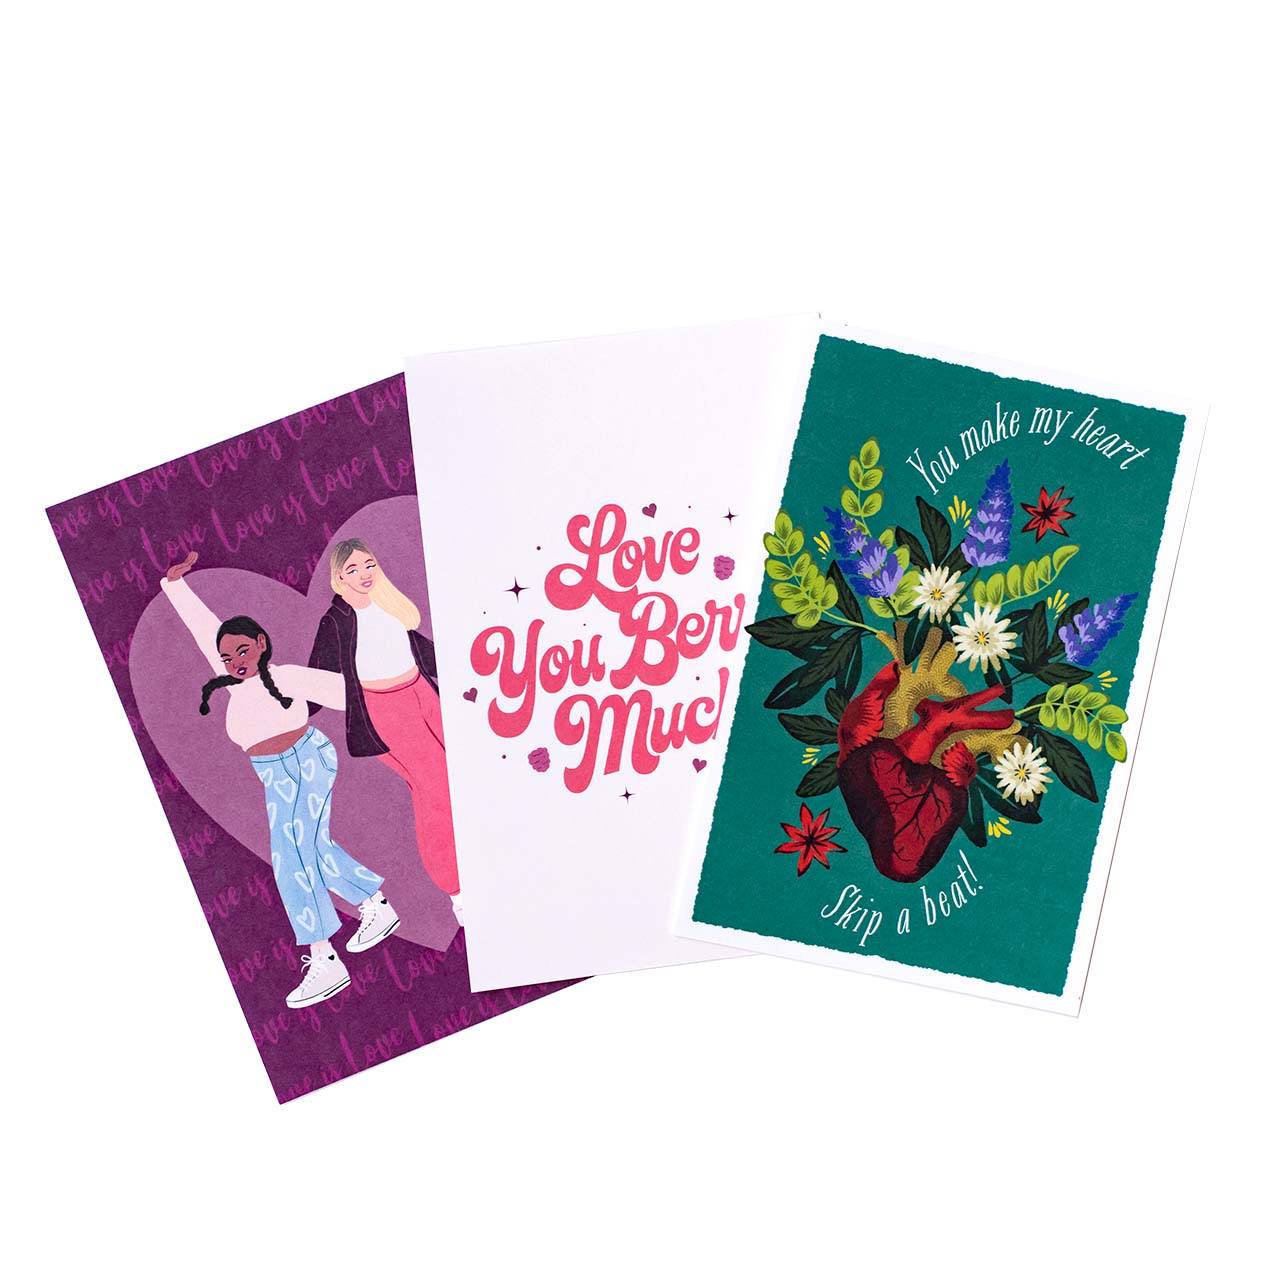 Theo Valentine's Day card collection: 3 exclusive Valentine's day designs